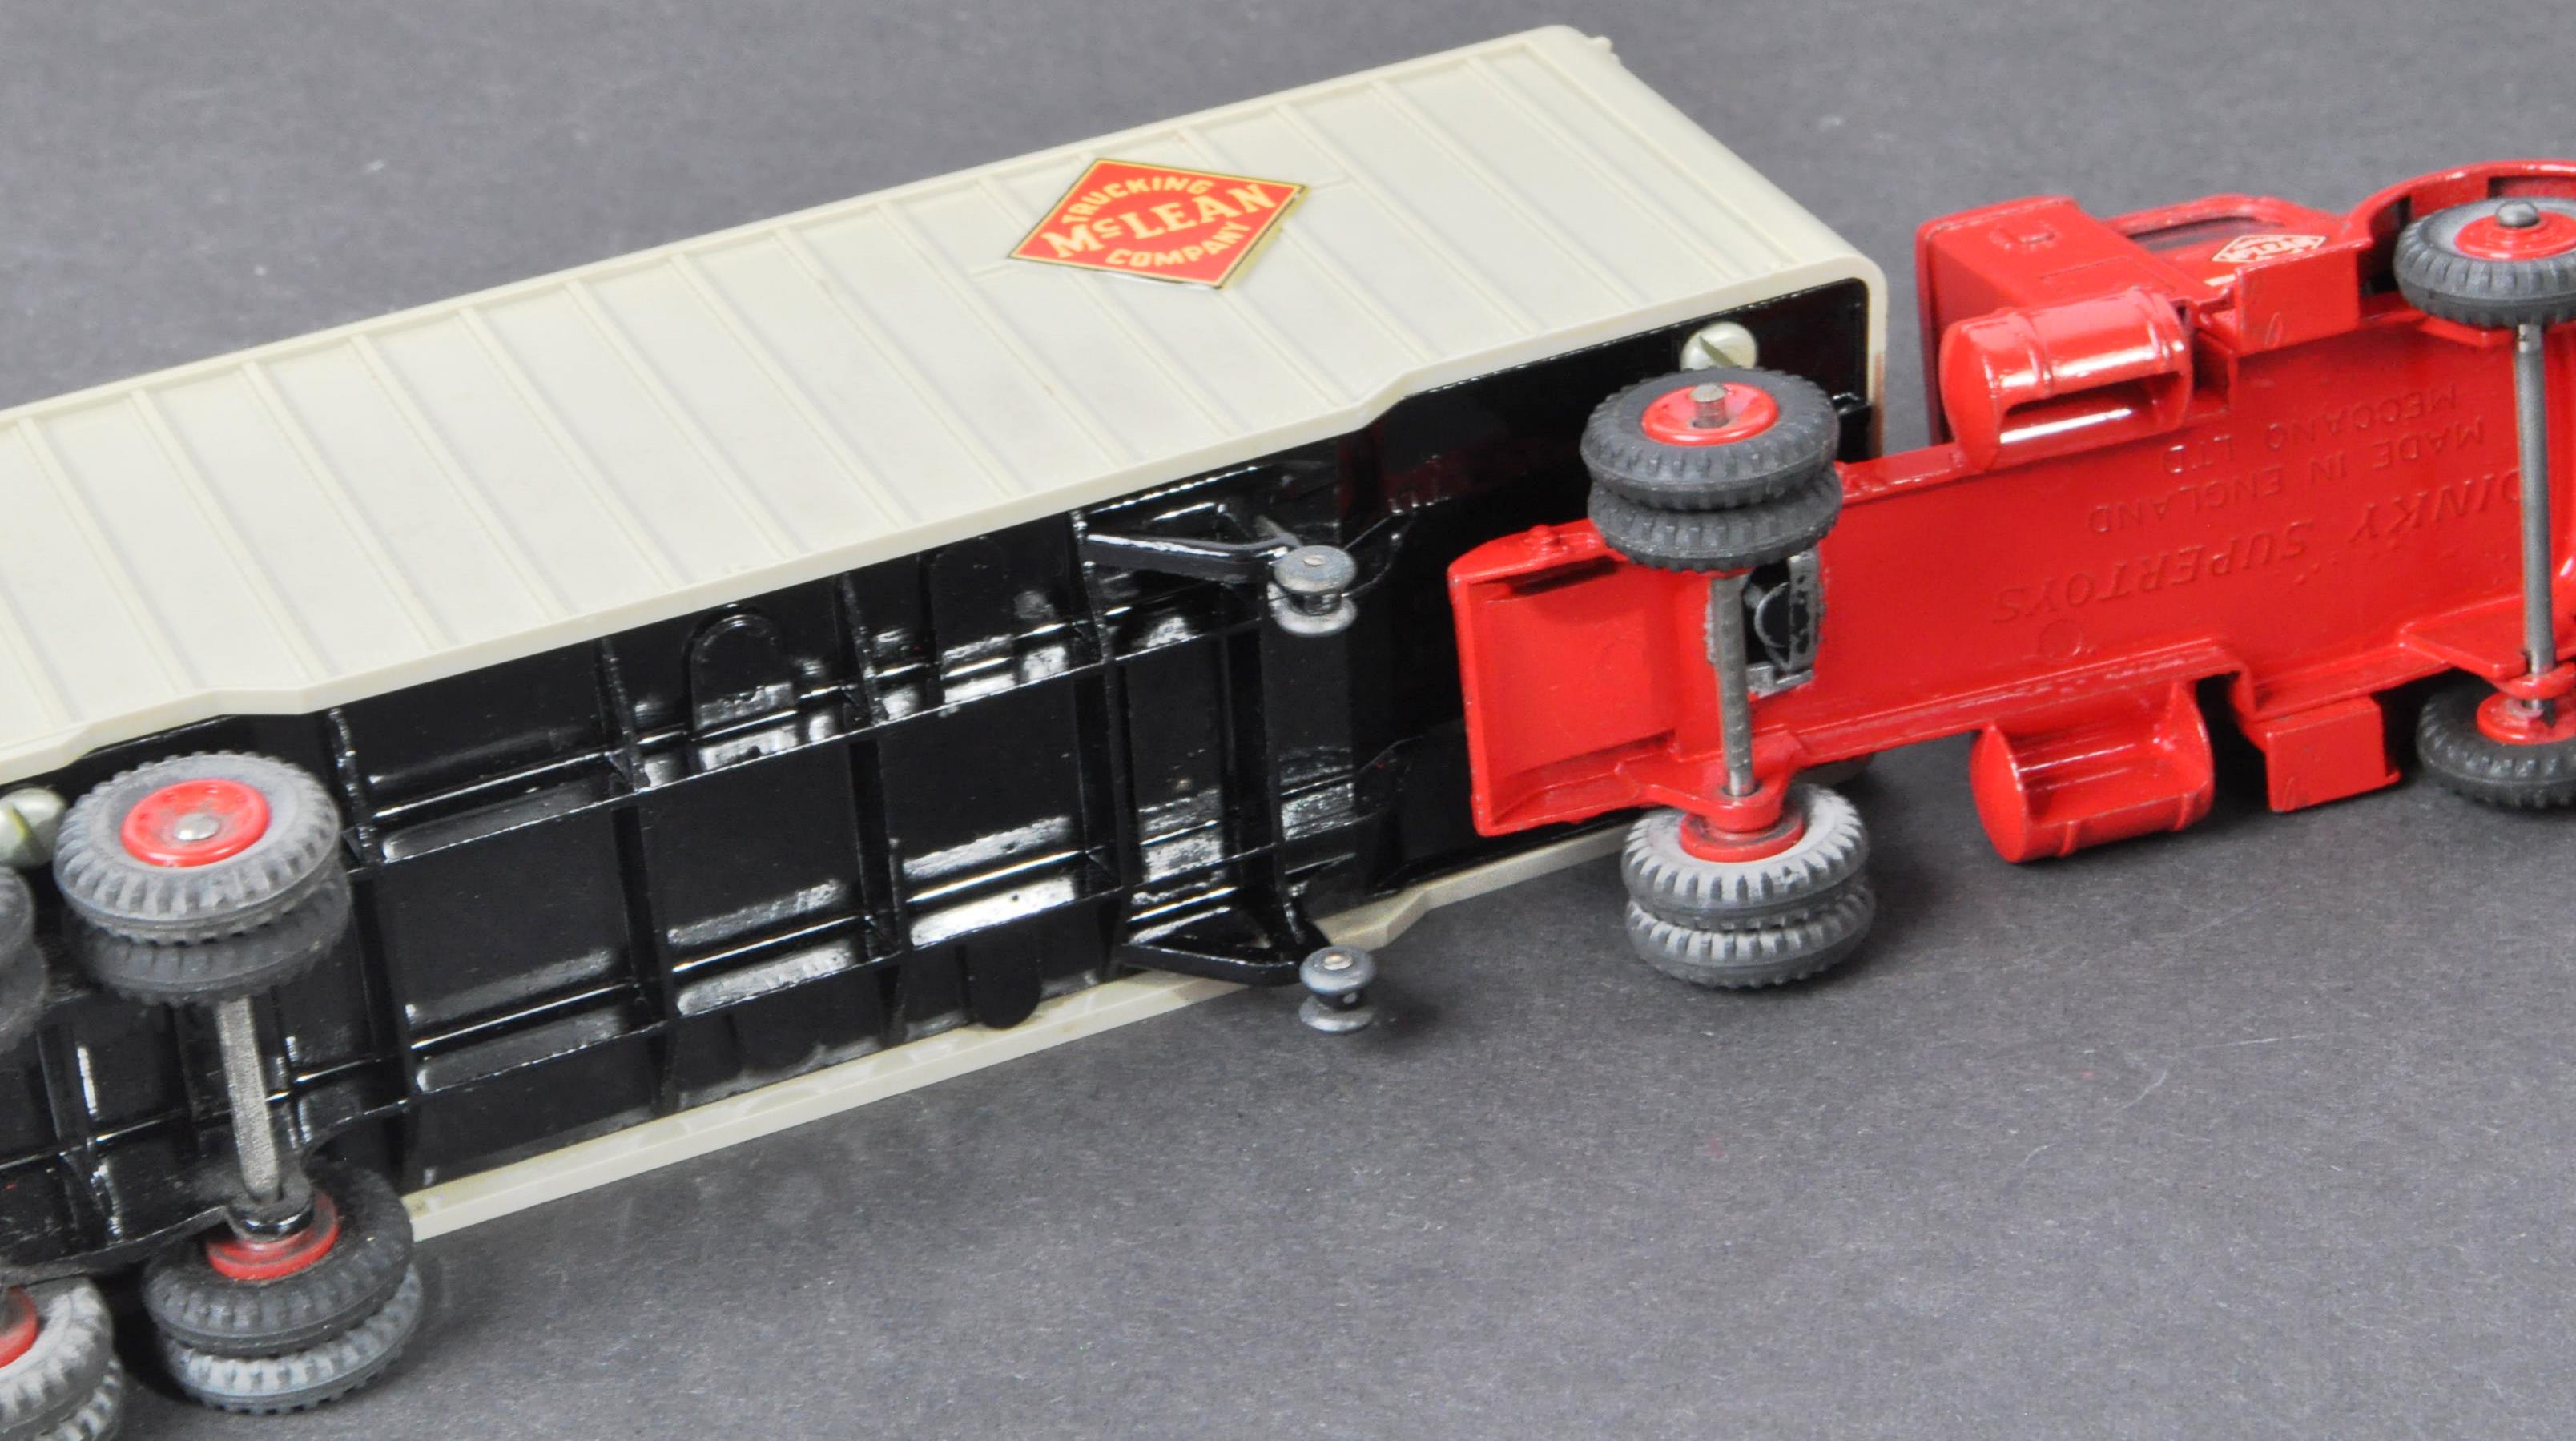 DINKY TOYS - ORIGINAL 948 TRACTOR-TRAILER MCLEAN DIECAST MODEL - Image 8 of 8